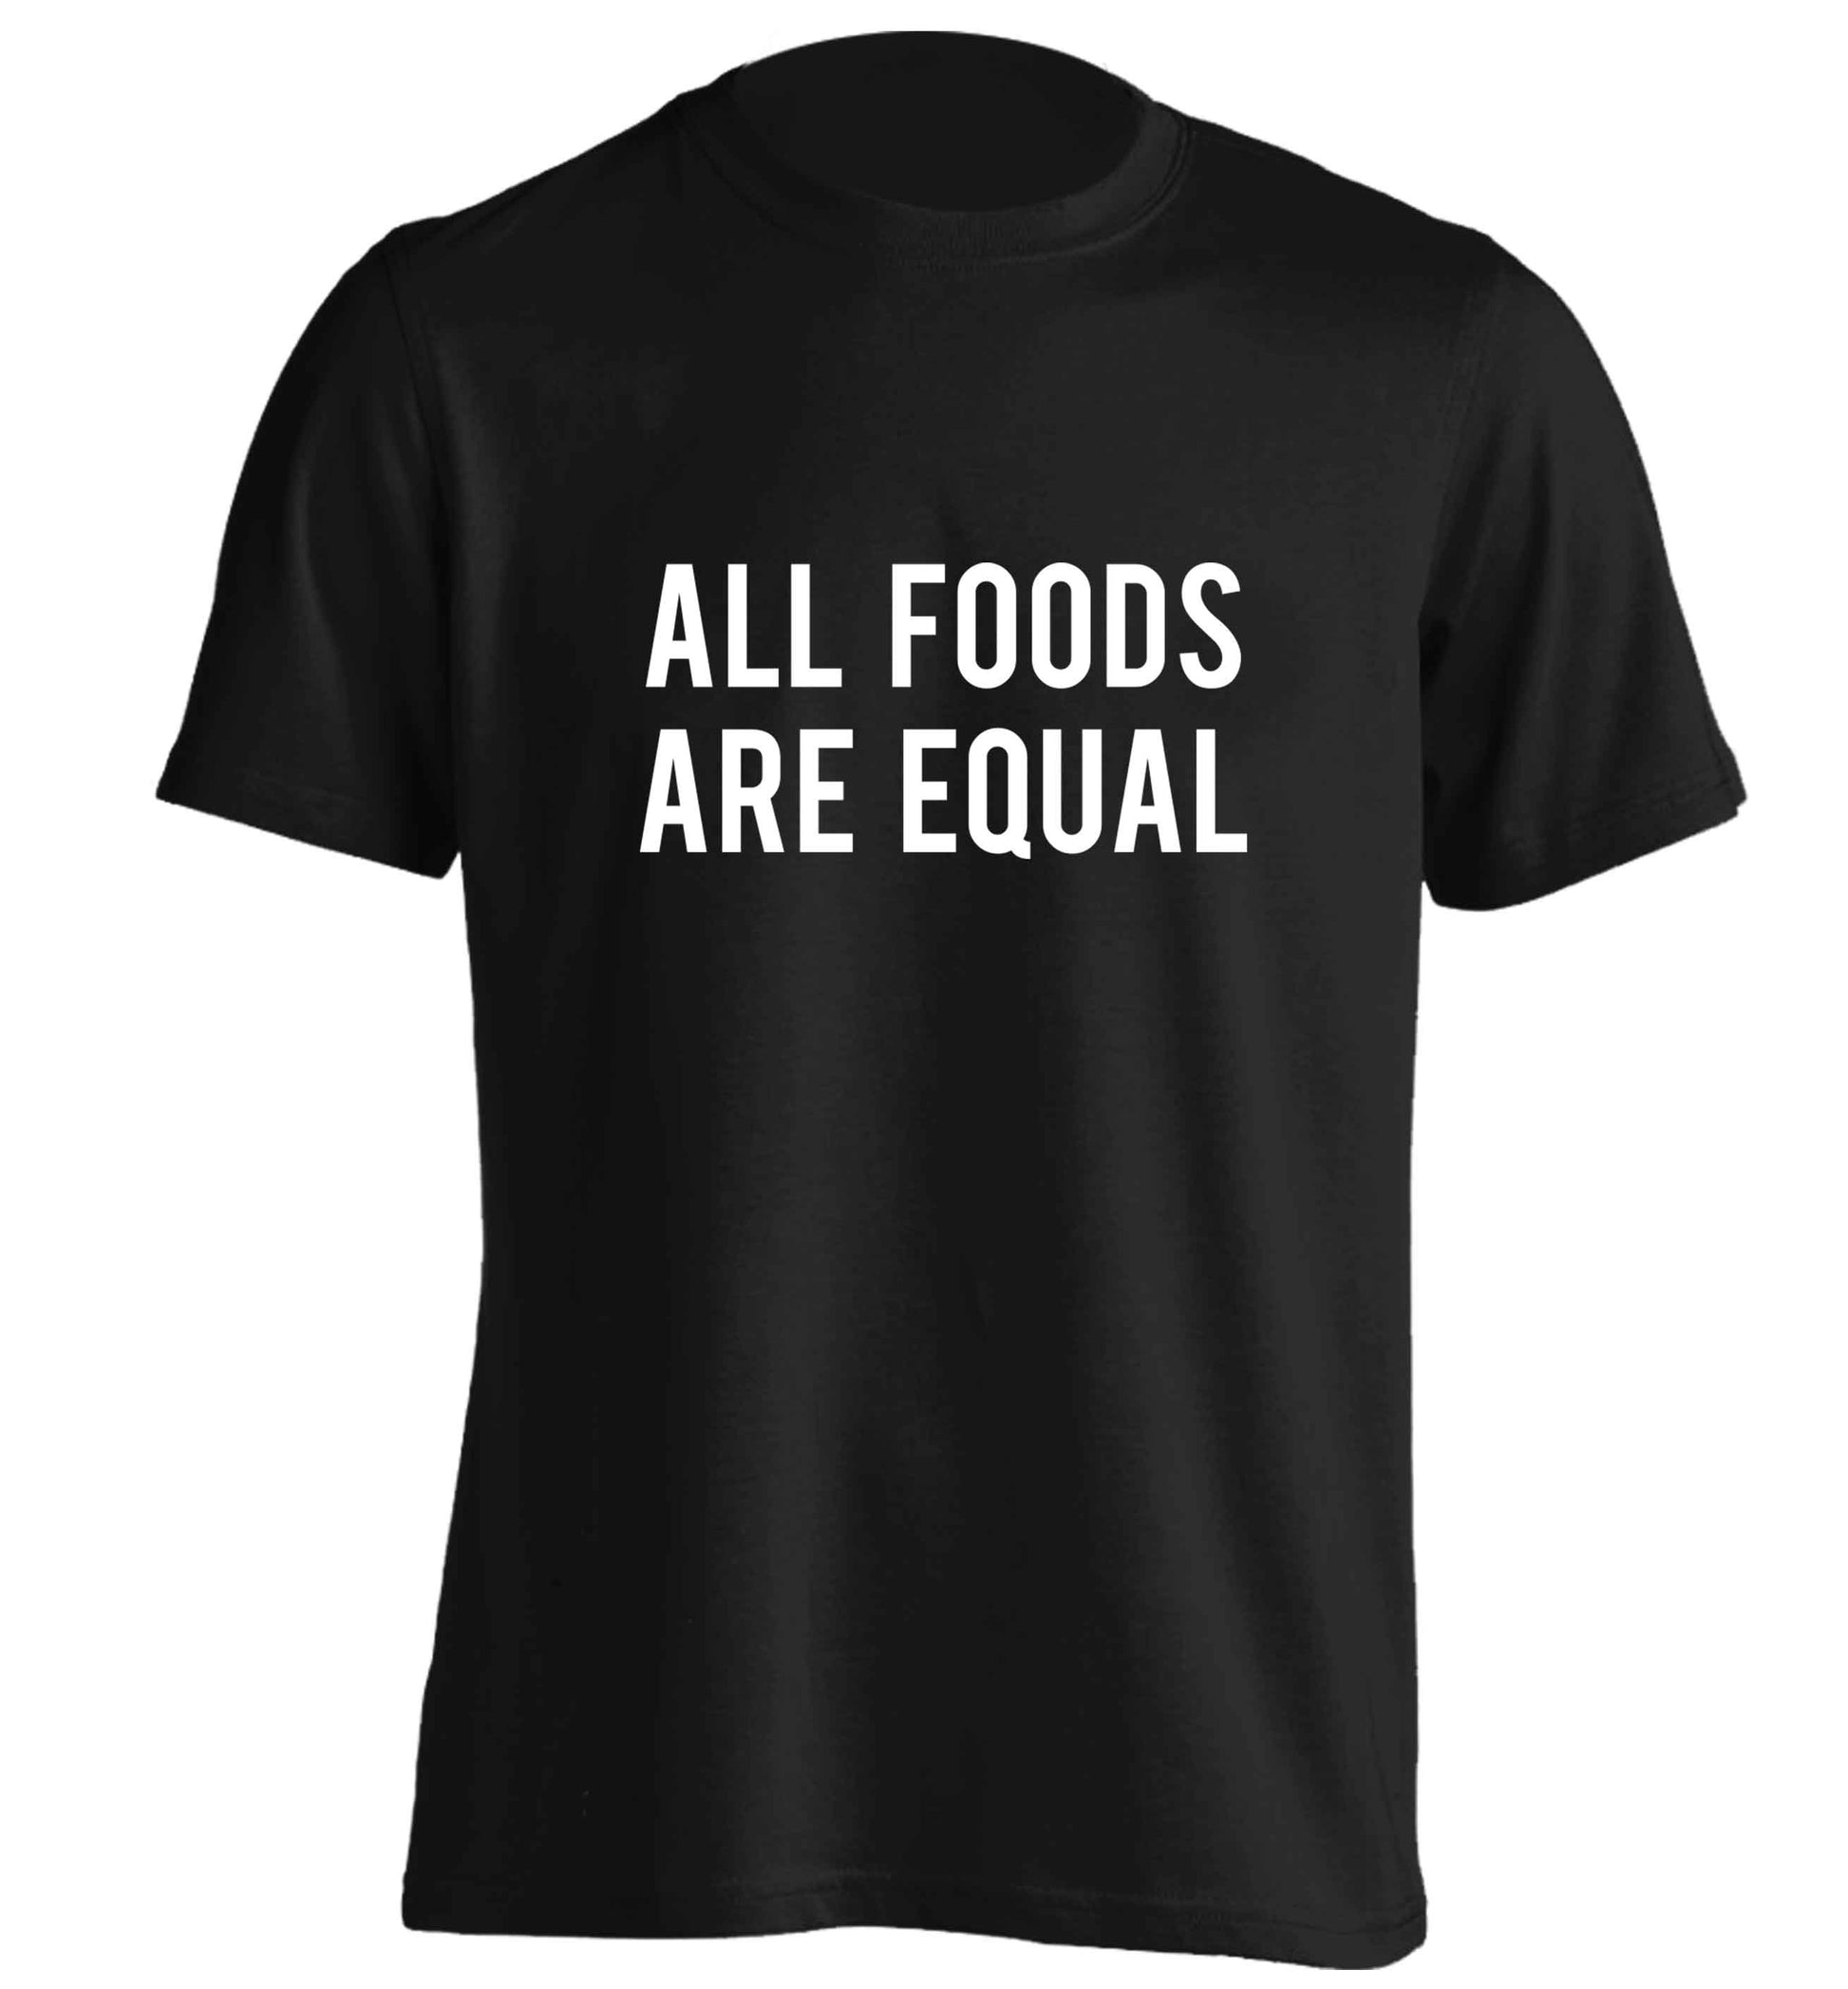 All foods are equal adults unisex black Tshirt 2XL